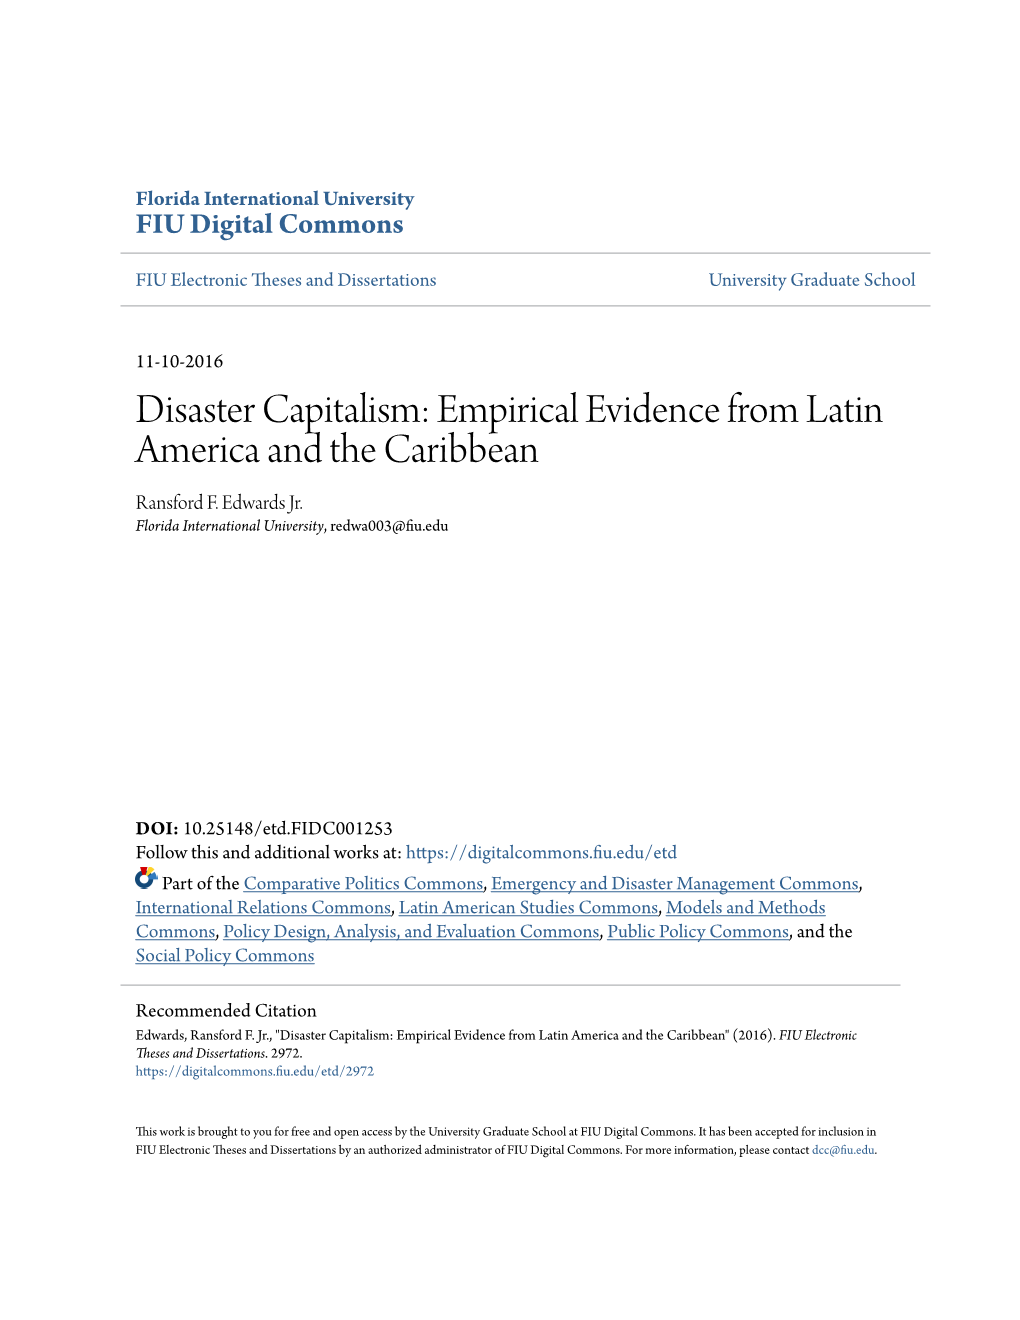 Disaster Capitalism: Empirical Evidence from Latin America and the Caribbean Ransford F